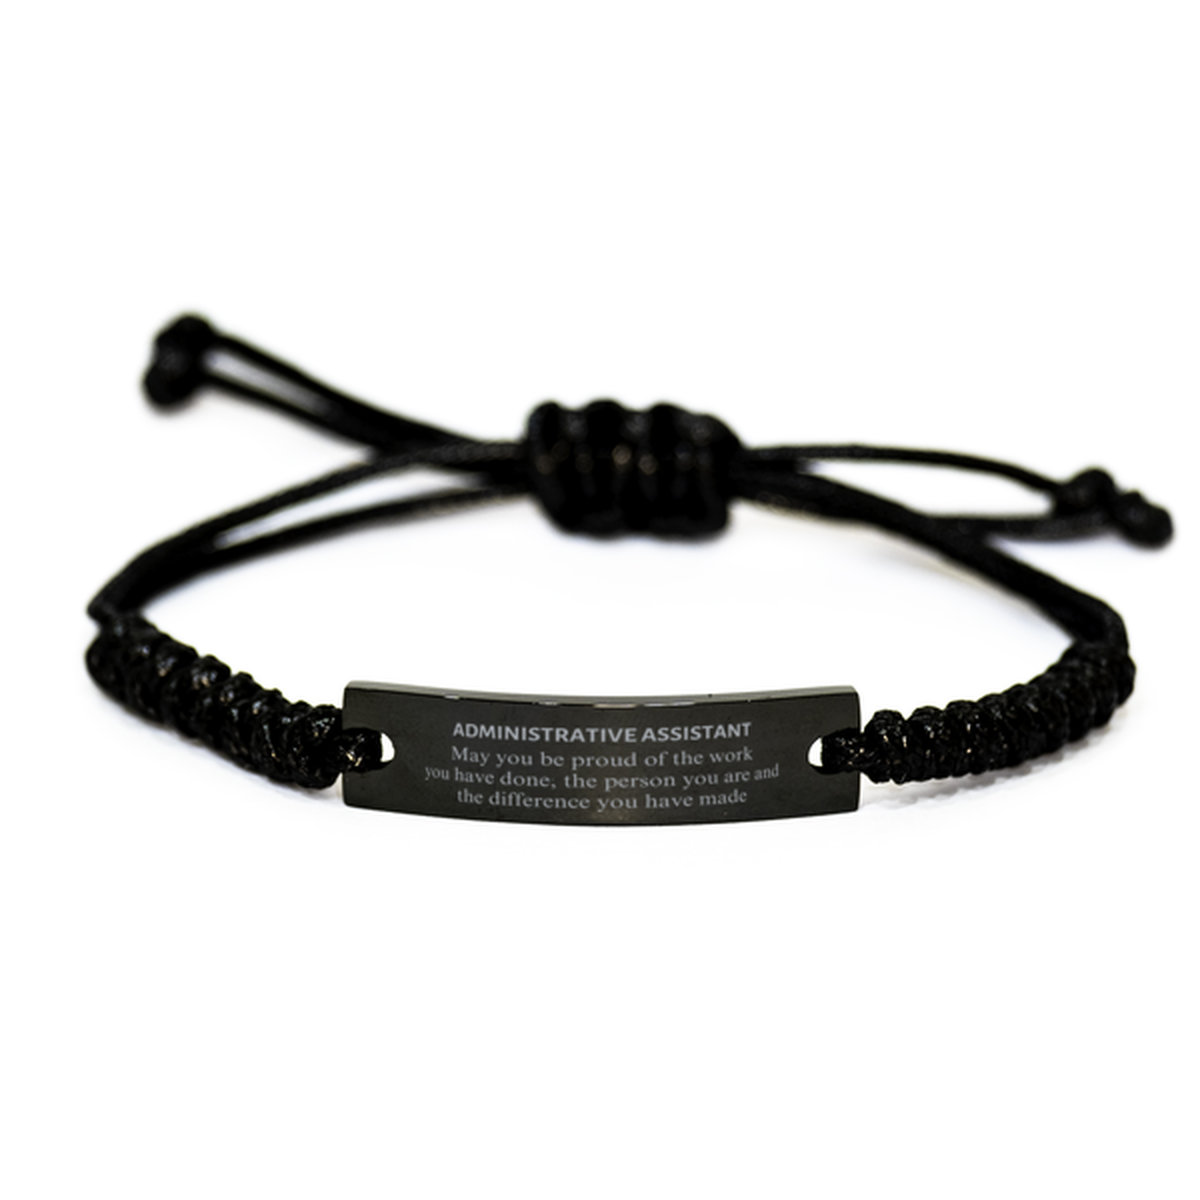 Administrative Assistant May you be proud of the work you have done, Retirement Administrative Assistant Black Rope Bracelet for Colleague Appreciation Gifts Amazing for Administrative Assistant